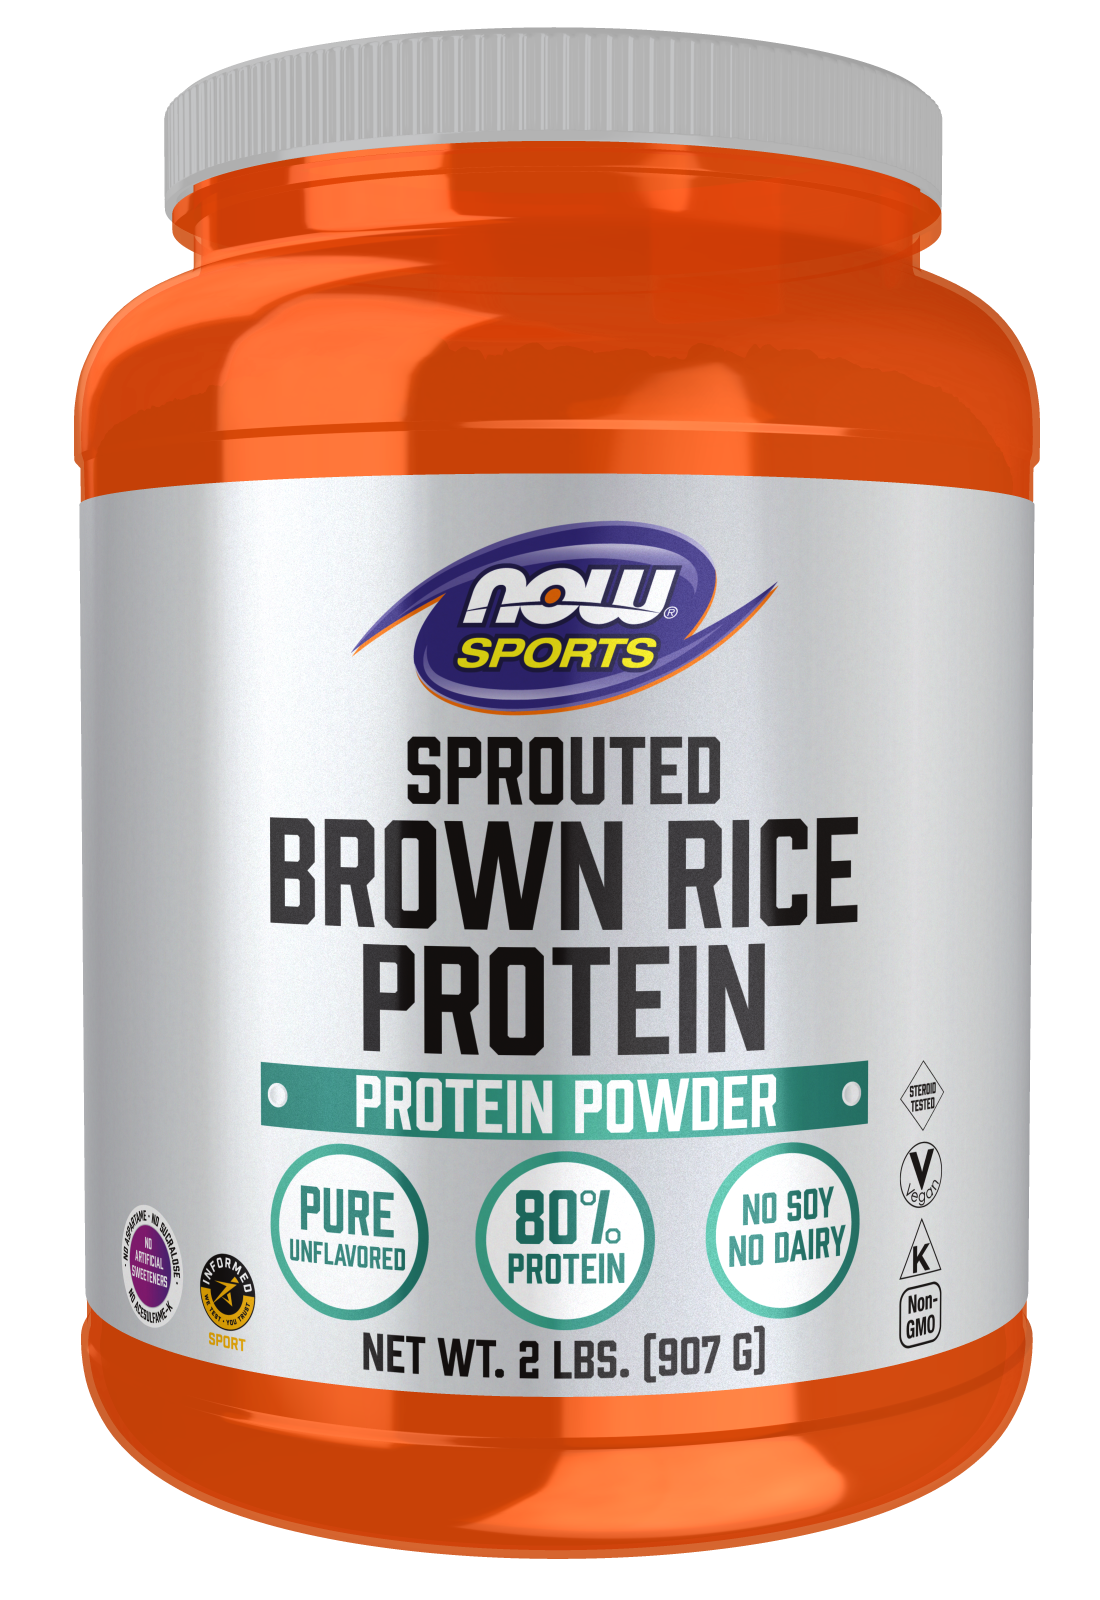 Sprouted Brown Rice Protein - 2 lbs. Bottle Front